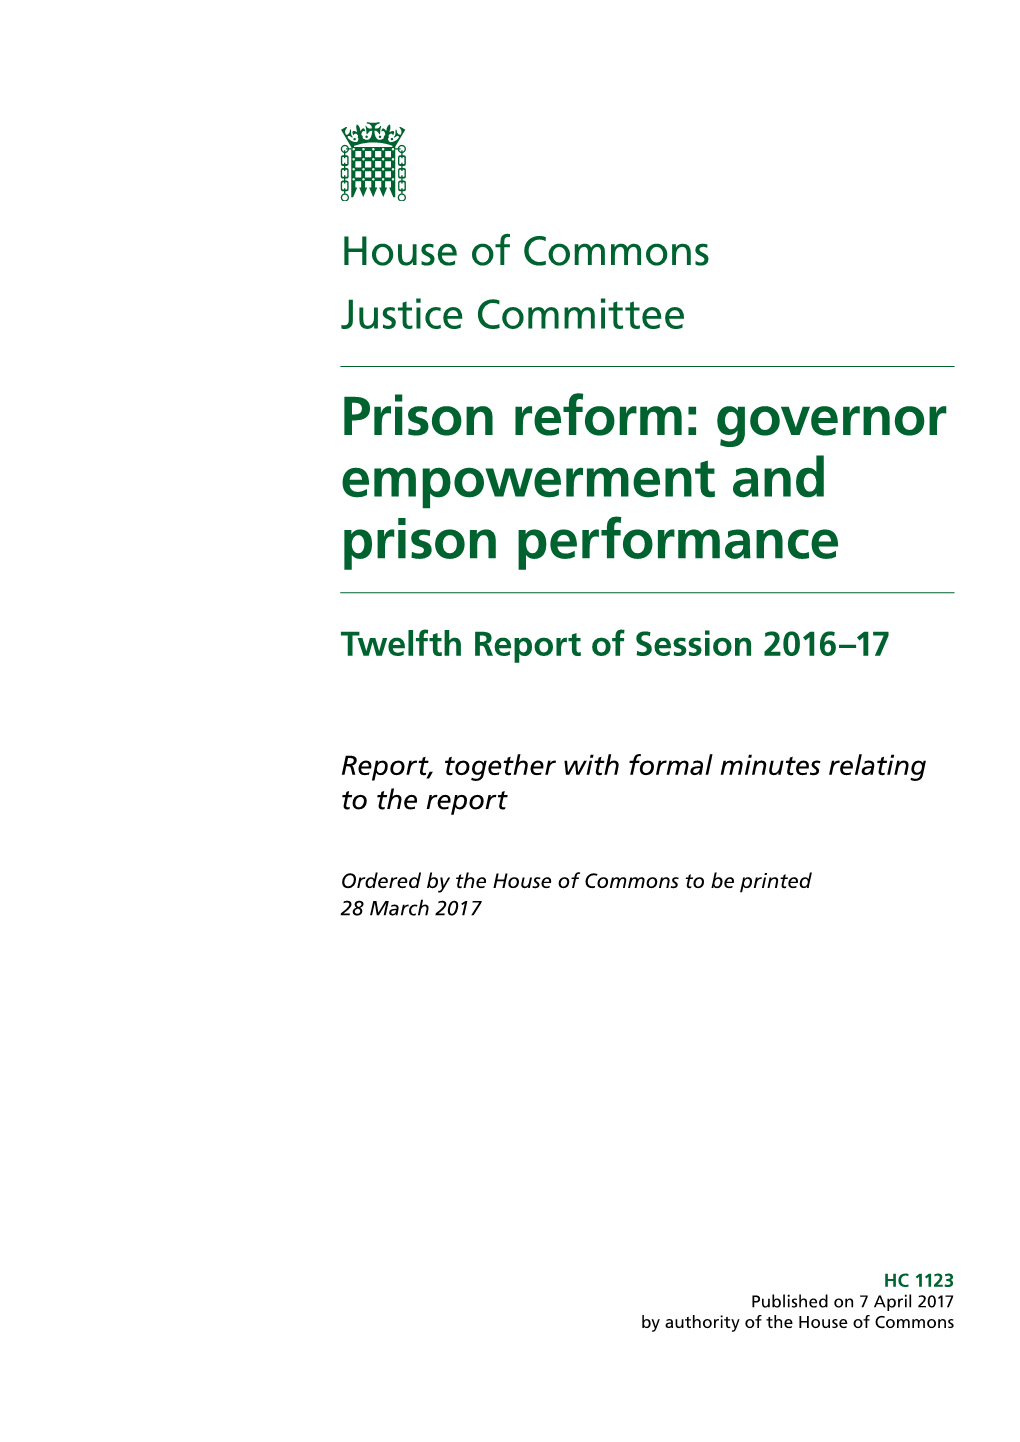 Reform: Governor Empowerment and Prison Performance